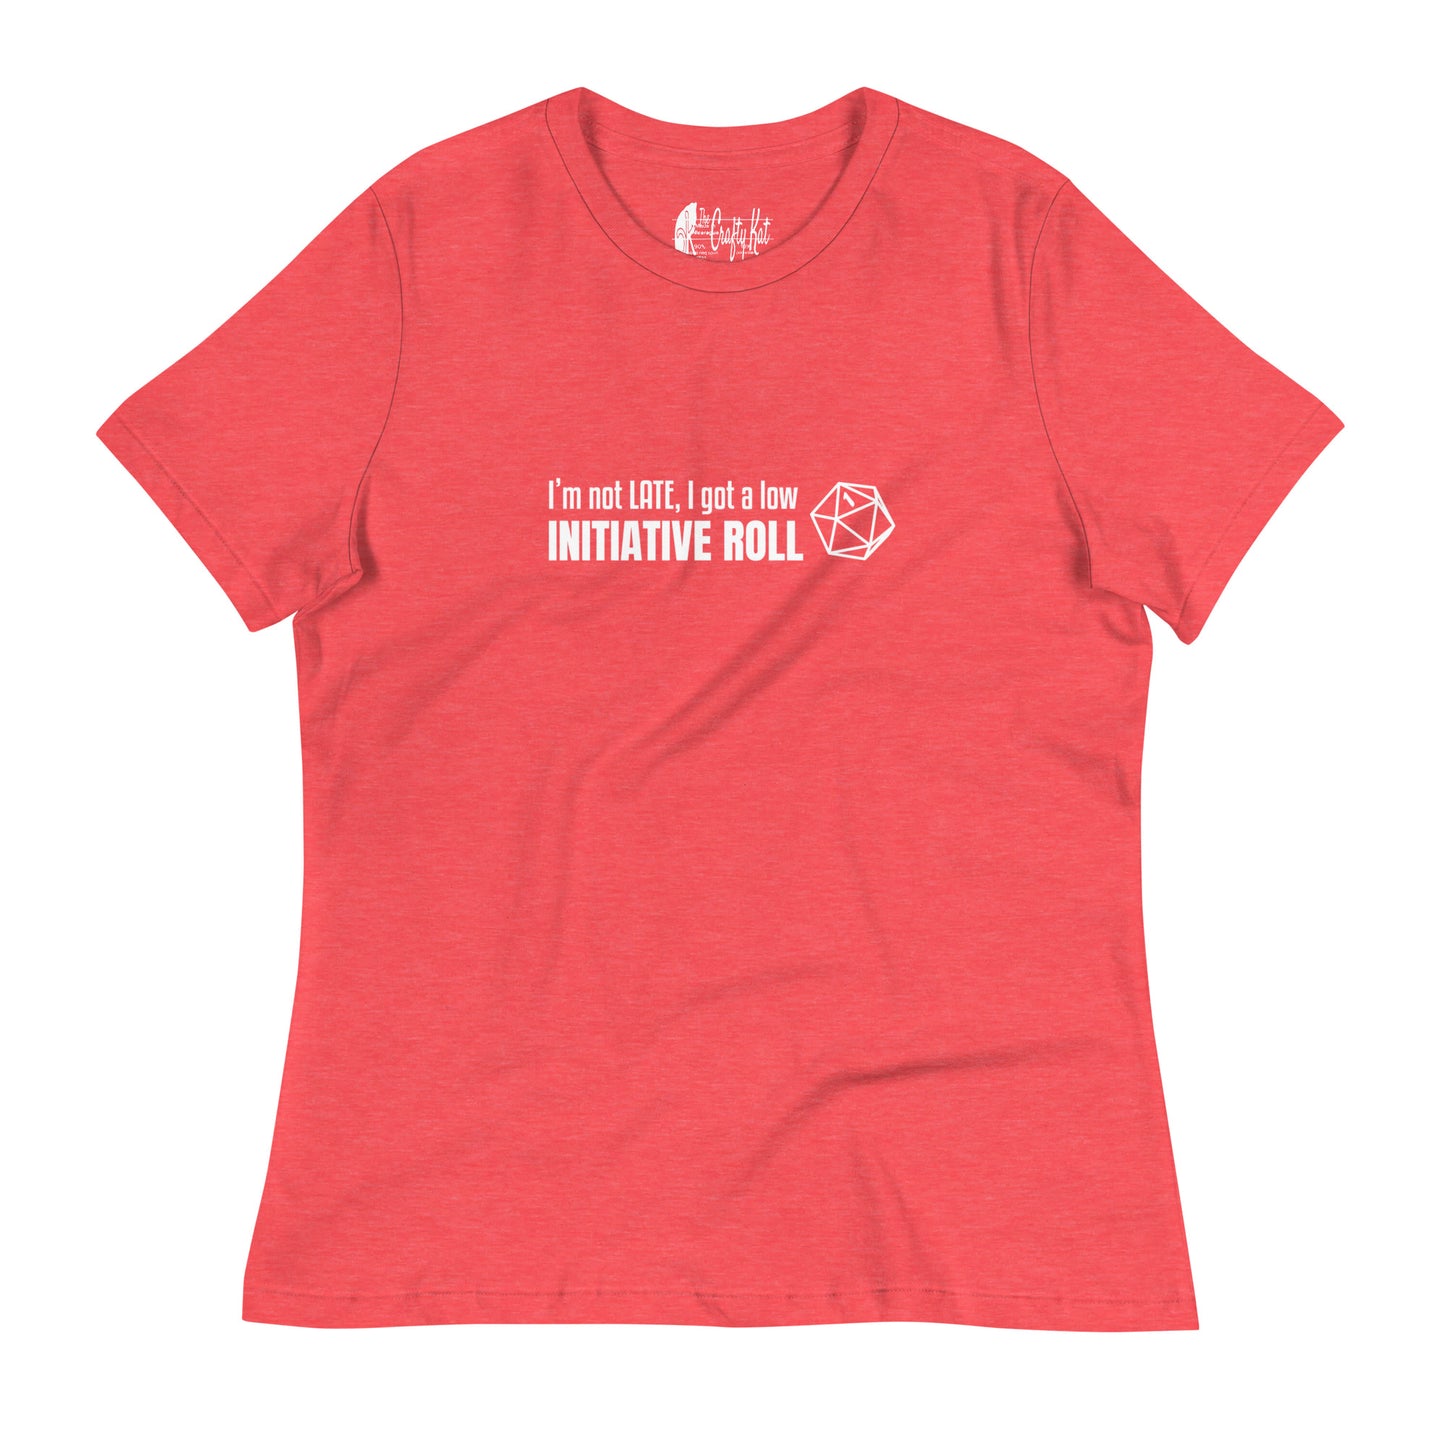 Heather Red women's relaxed-fit t-shirt with a graphic of a d20 (twenty-sided die) showing a roll of "1" and text: "I'm not LATE, I got a low INITIATIVE ROLL"